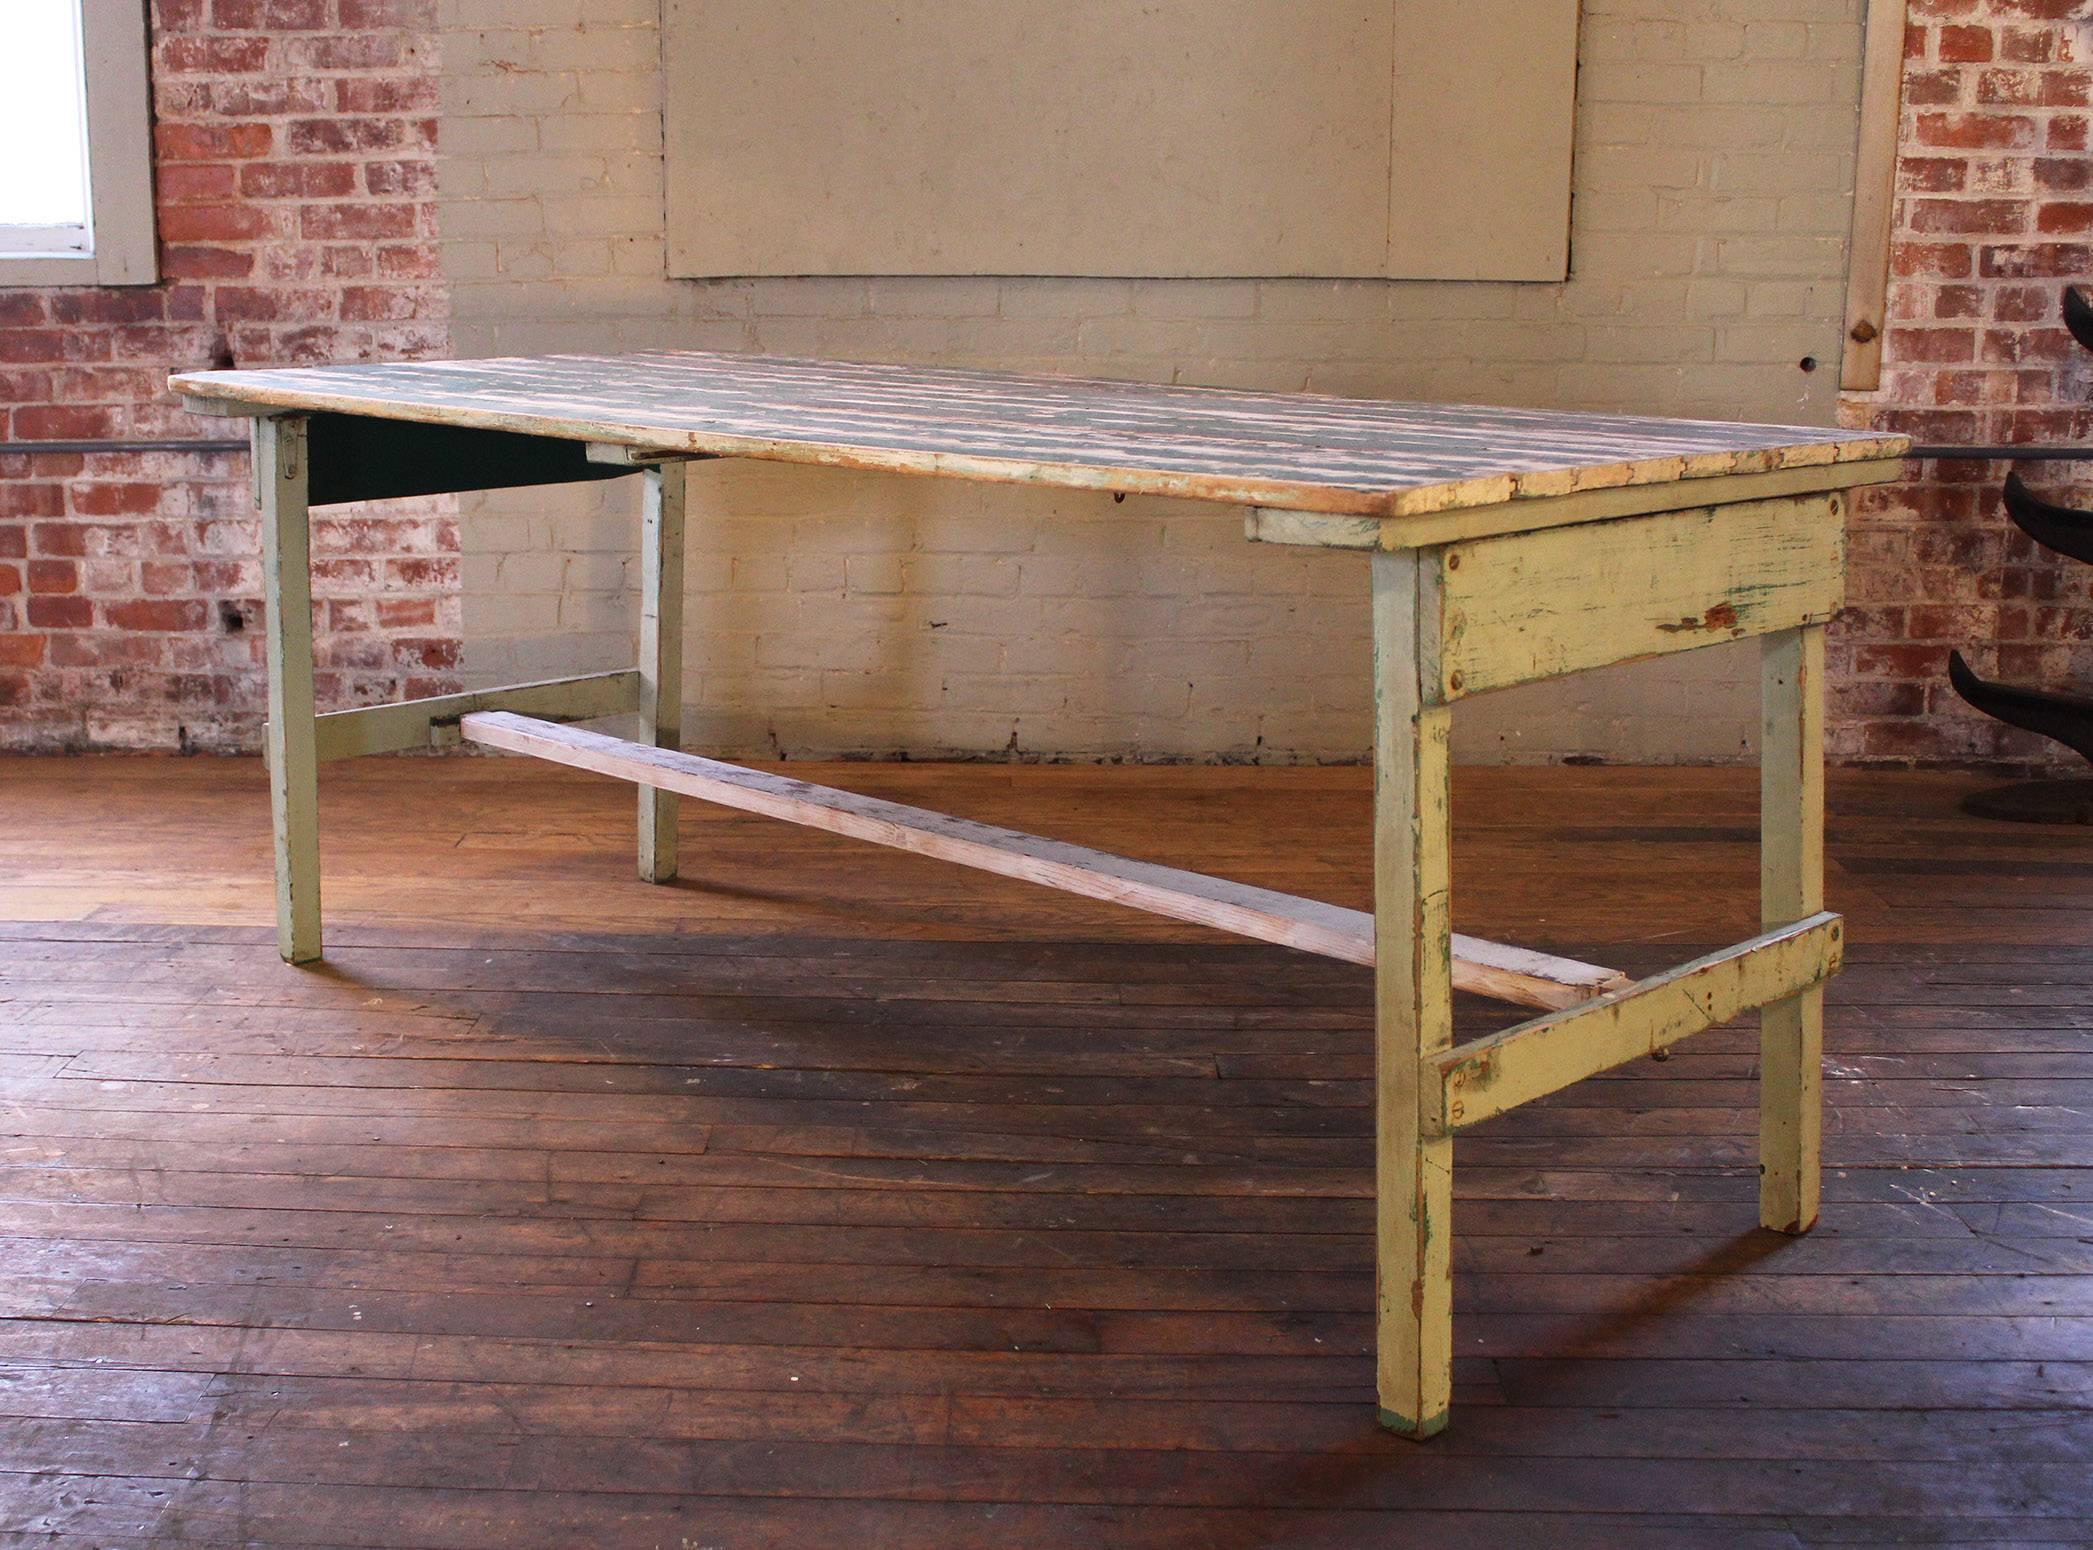 Authentic vintage rustic farm or country style collapsible wooden display table with distressed original paint. Table has movement to it due to the ability to fold up. More suitable as a display table for lighter objects. It would need to be